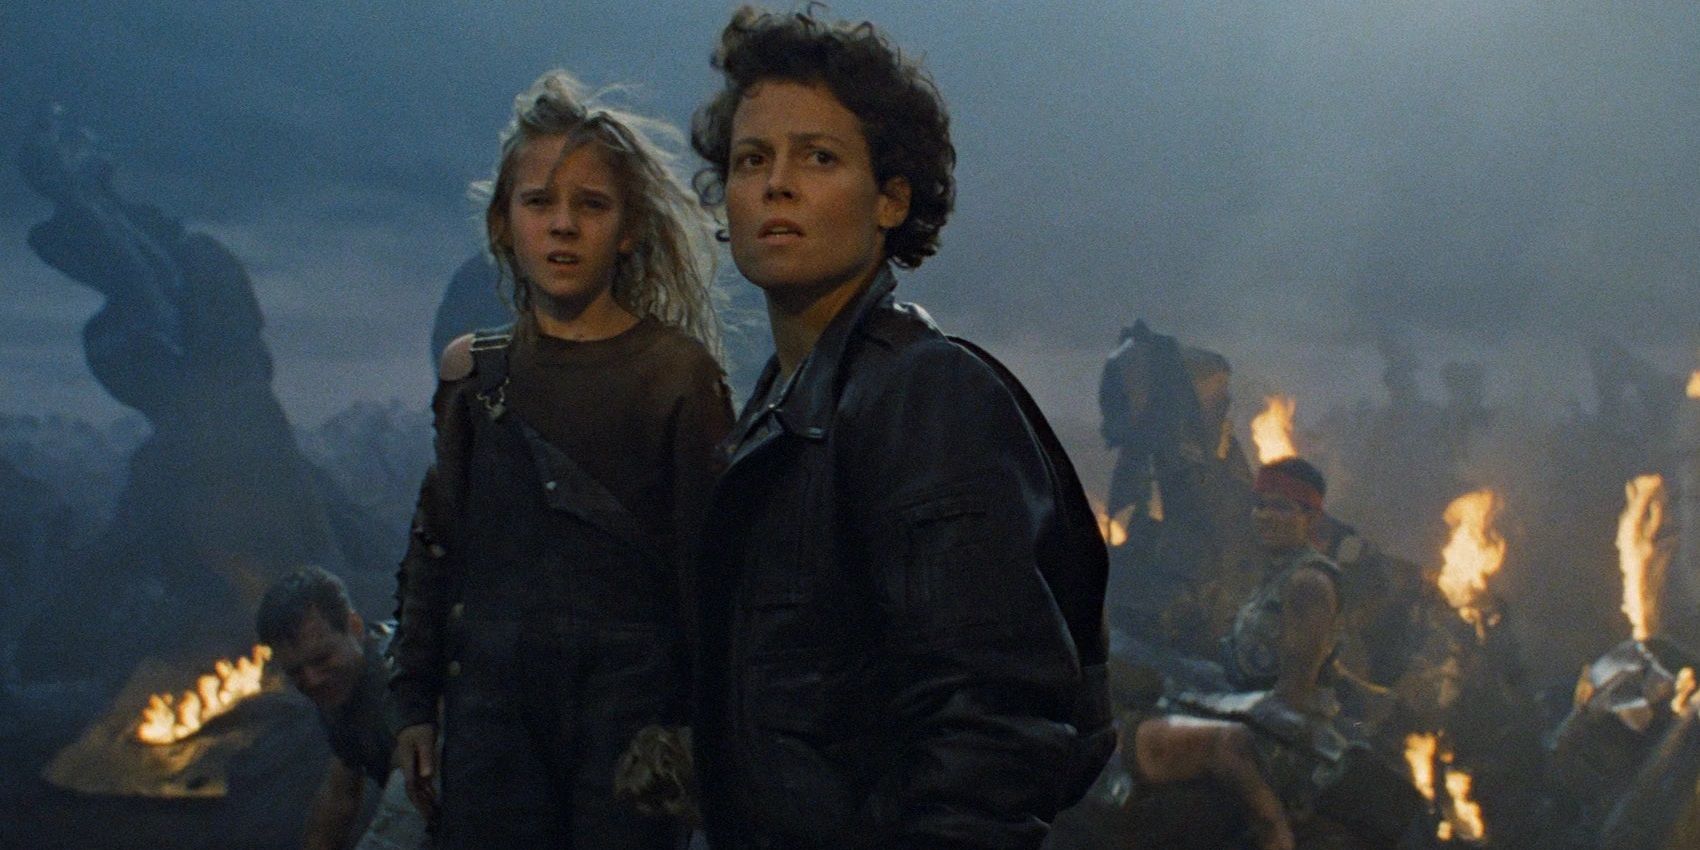 Ripley stands with Newt in Aliens